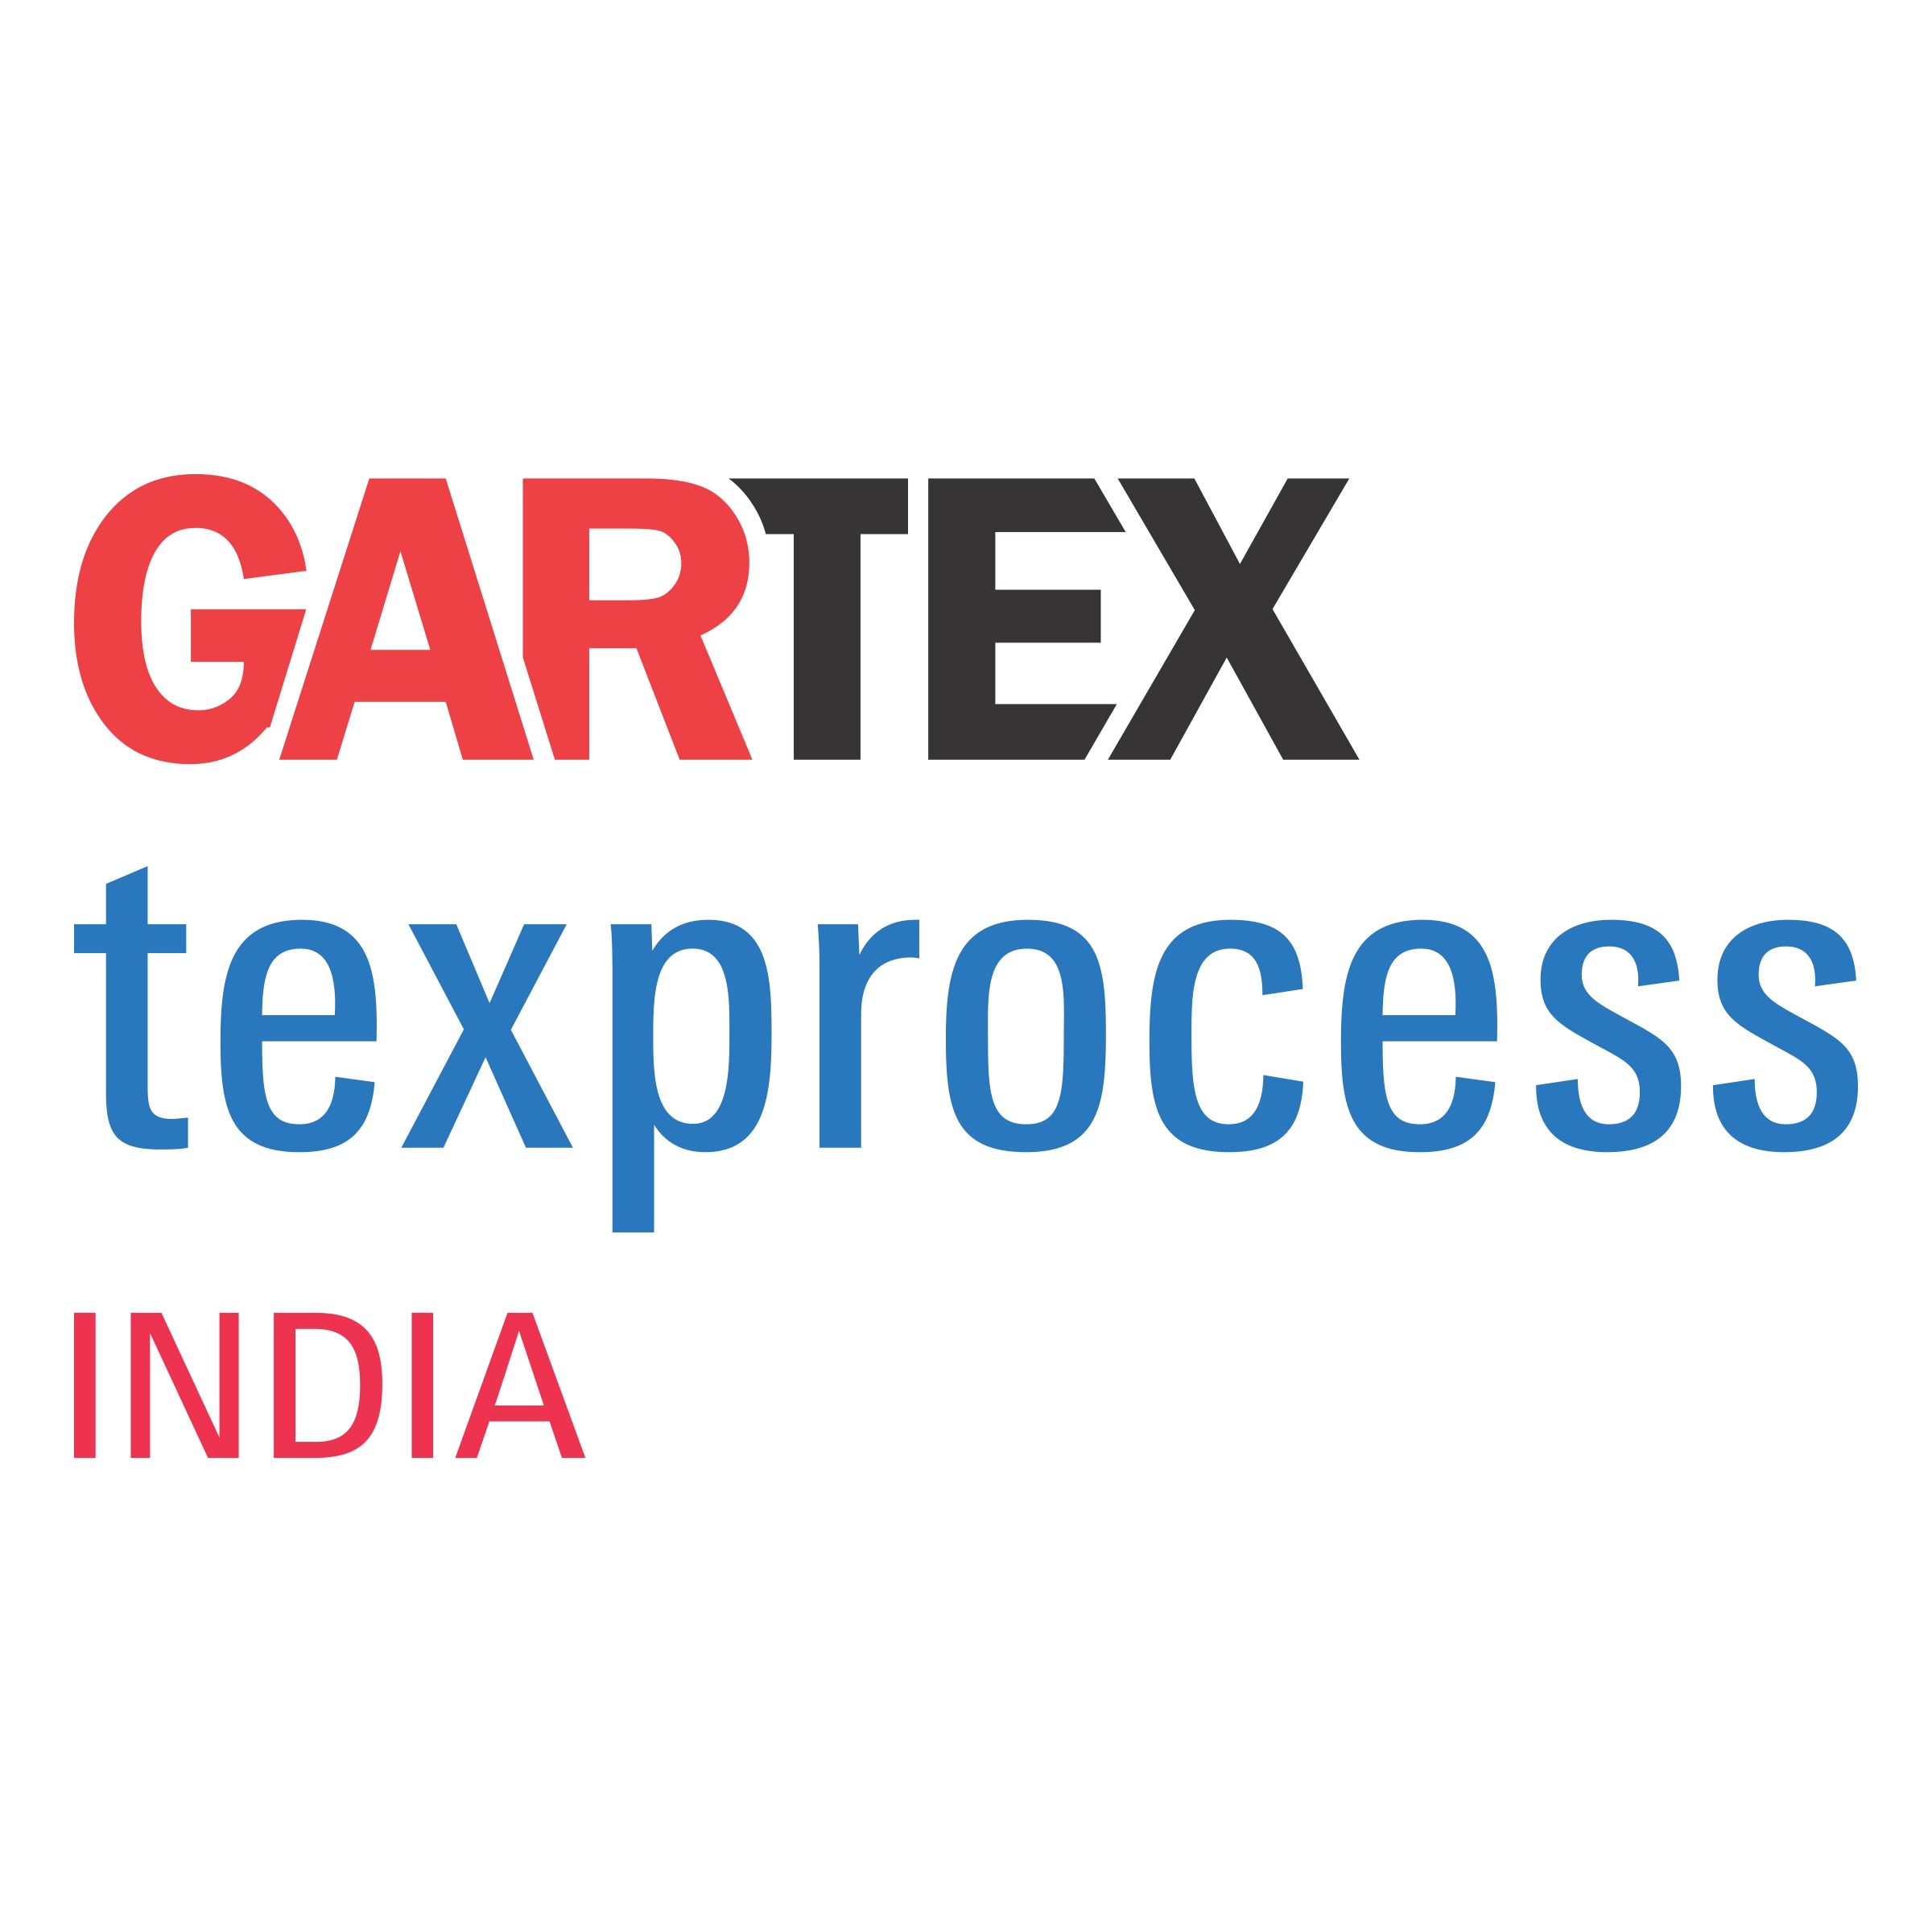 Messe Frankfurt India  MEX Exhibitions announce first hybrid event for Gartex Texprocess India  Screen Print India